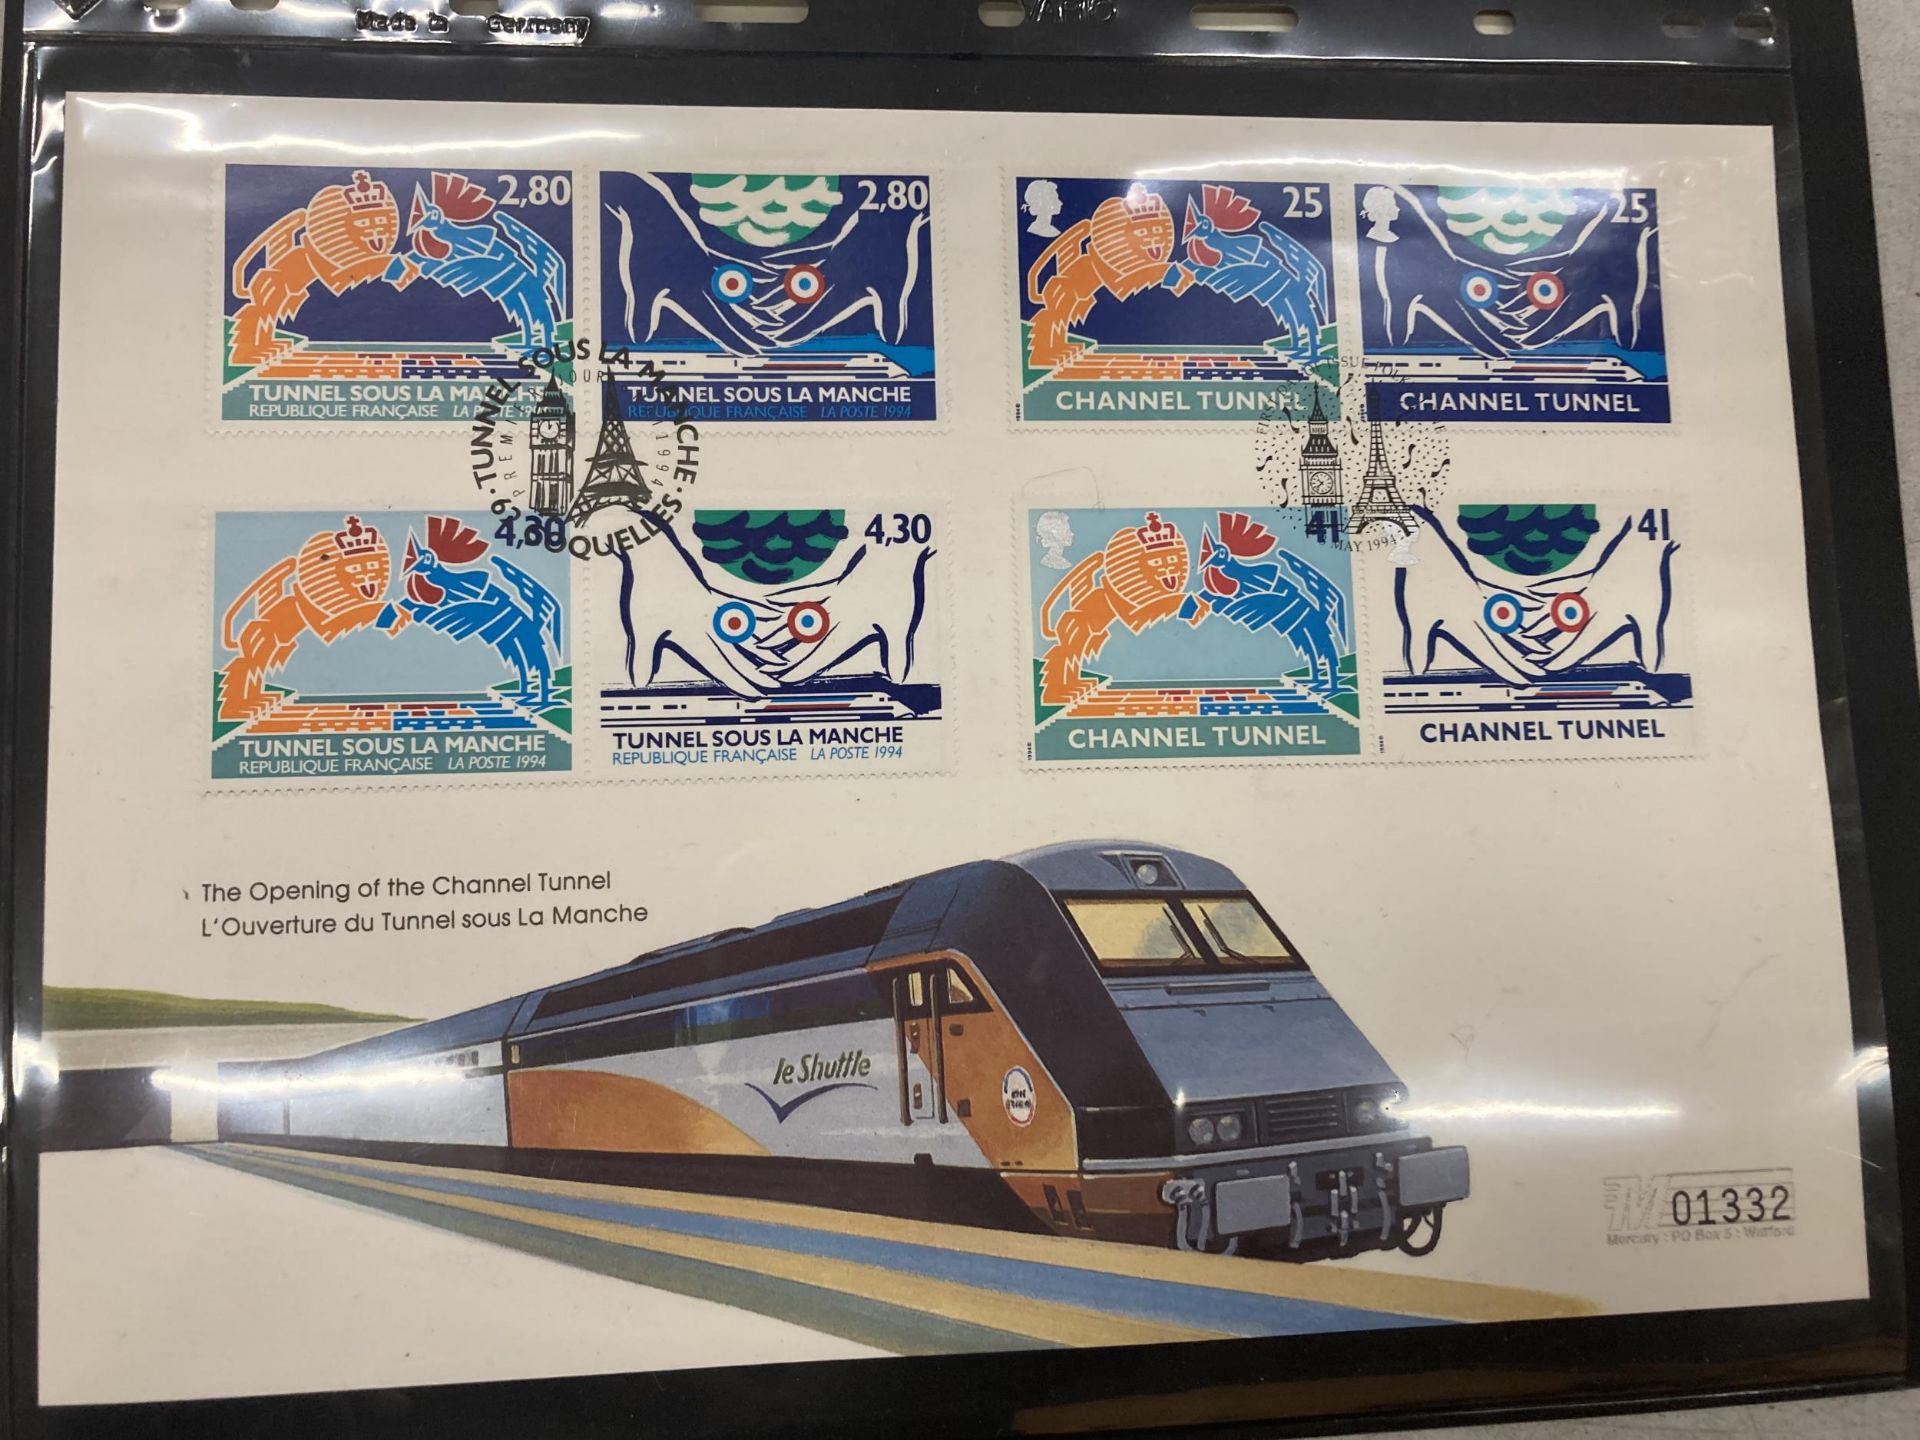 A CHANNEL TUNNEL / LE SHUTTLE LOT - NOVELTY SADLER TEAPOT AND STAMPS - Image 2 of 4